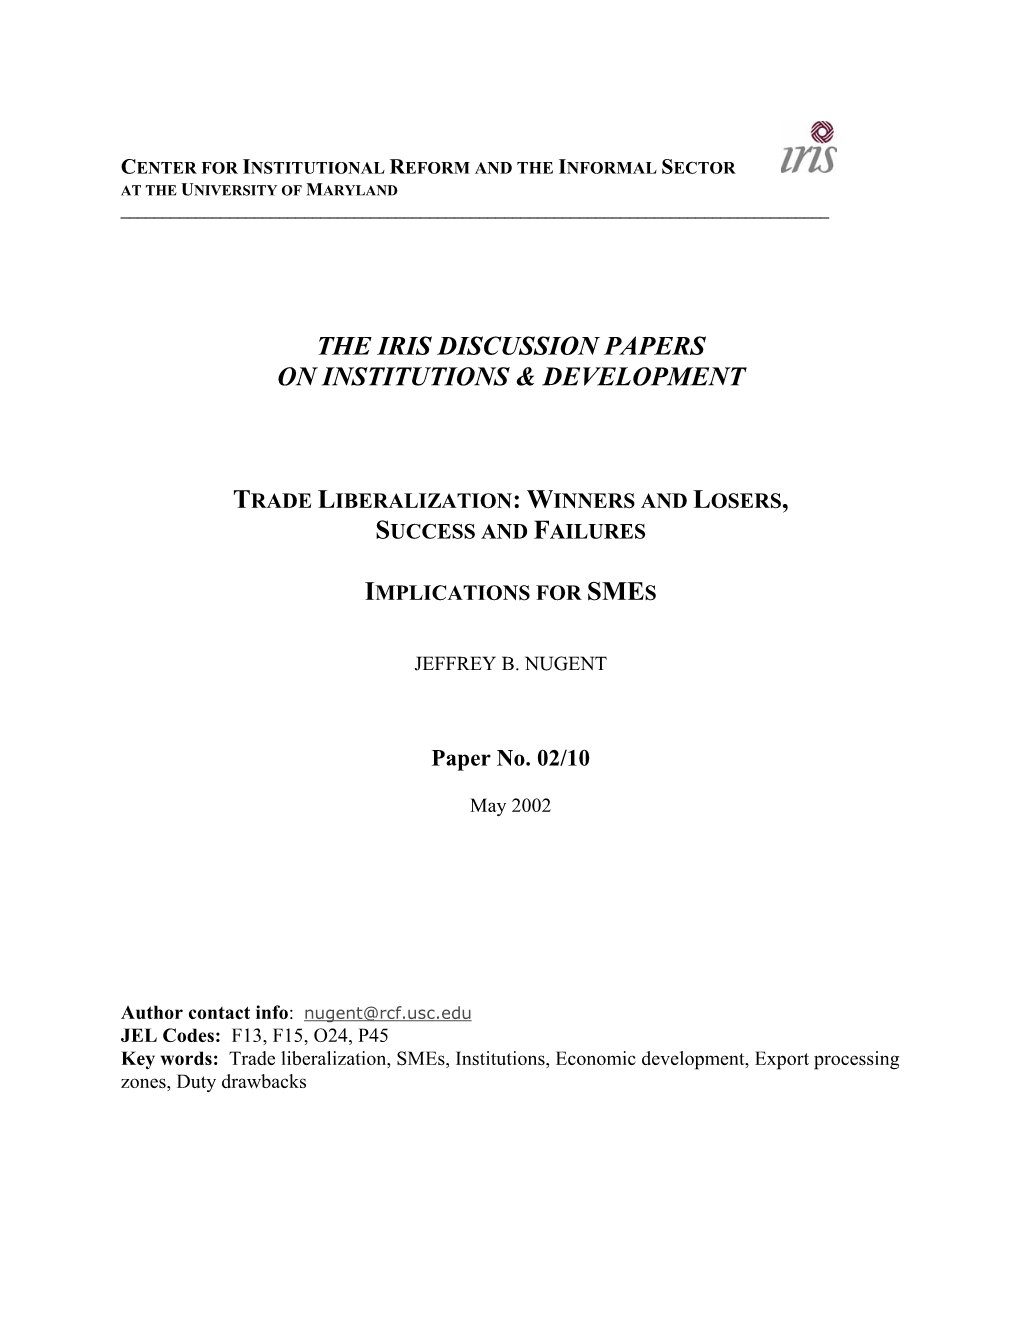 The Iris Discussion Papers on Institutions & Development Trade Liberalization